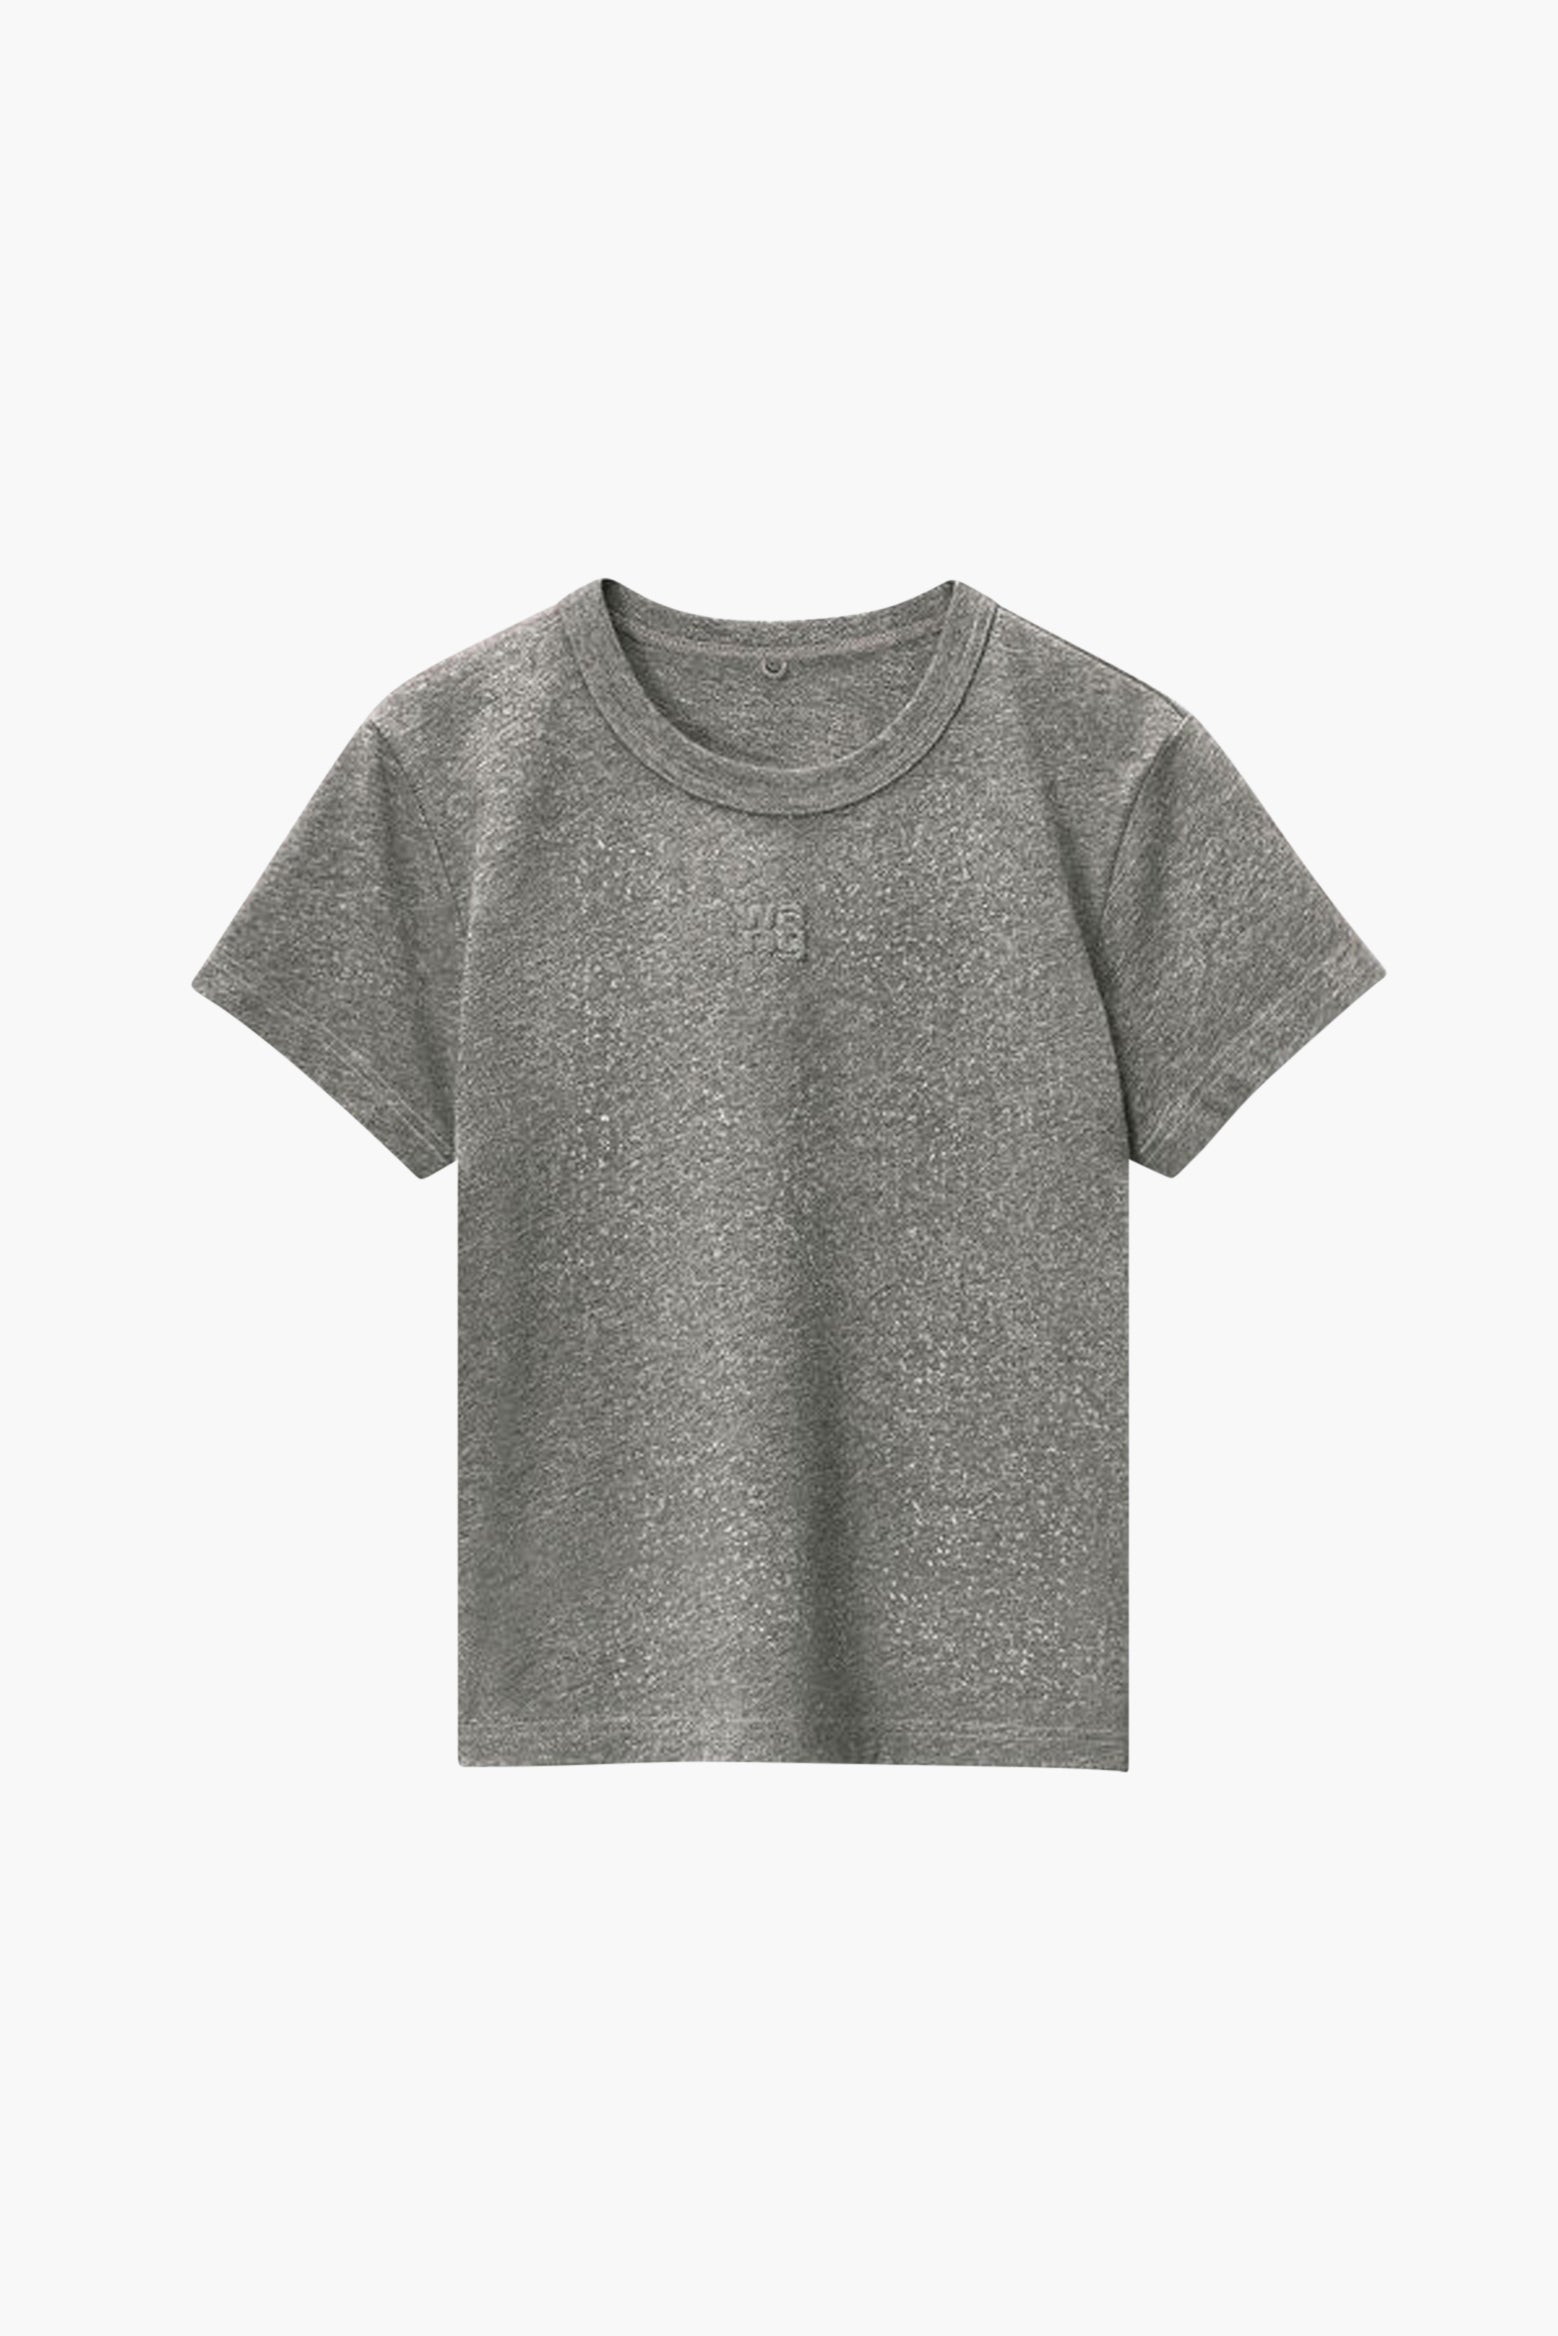 Alexander Wang Glitter Essential Jersey Shrunk Tee With Puff Logo in Sidewalk available at TNT The New Trend Australia.